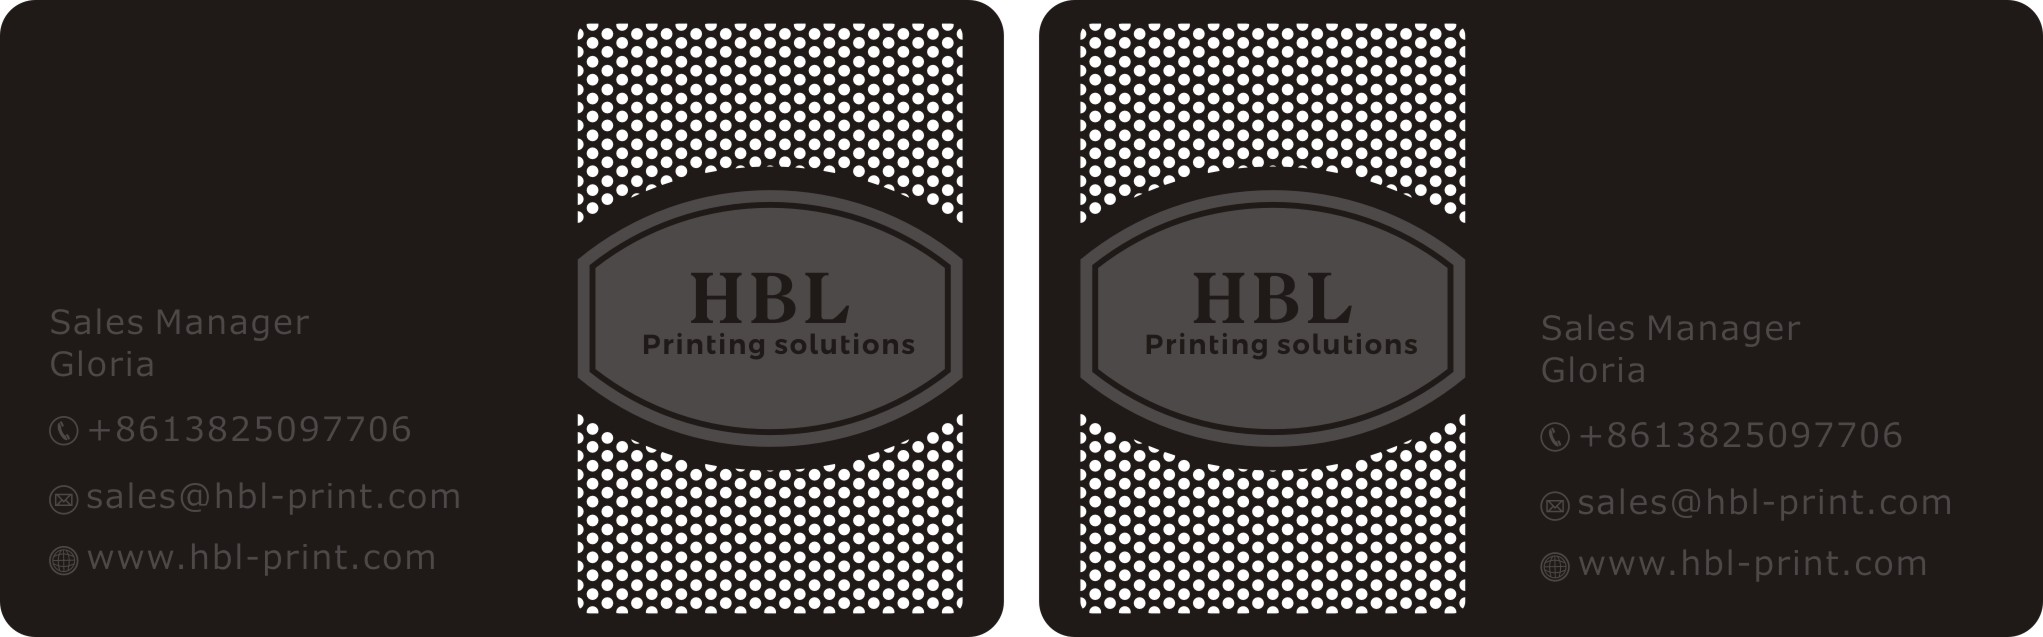 Free-Business-Card-Template (2)